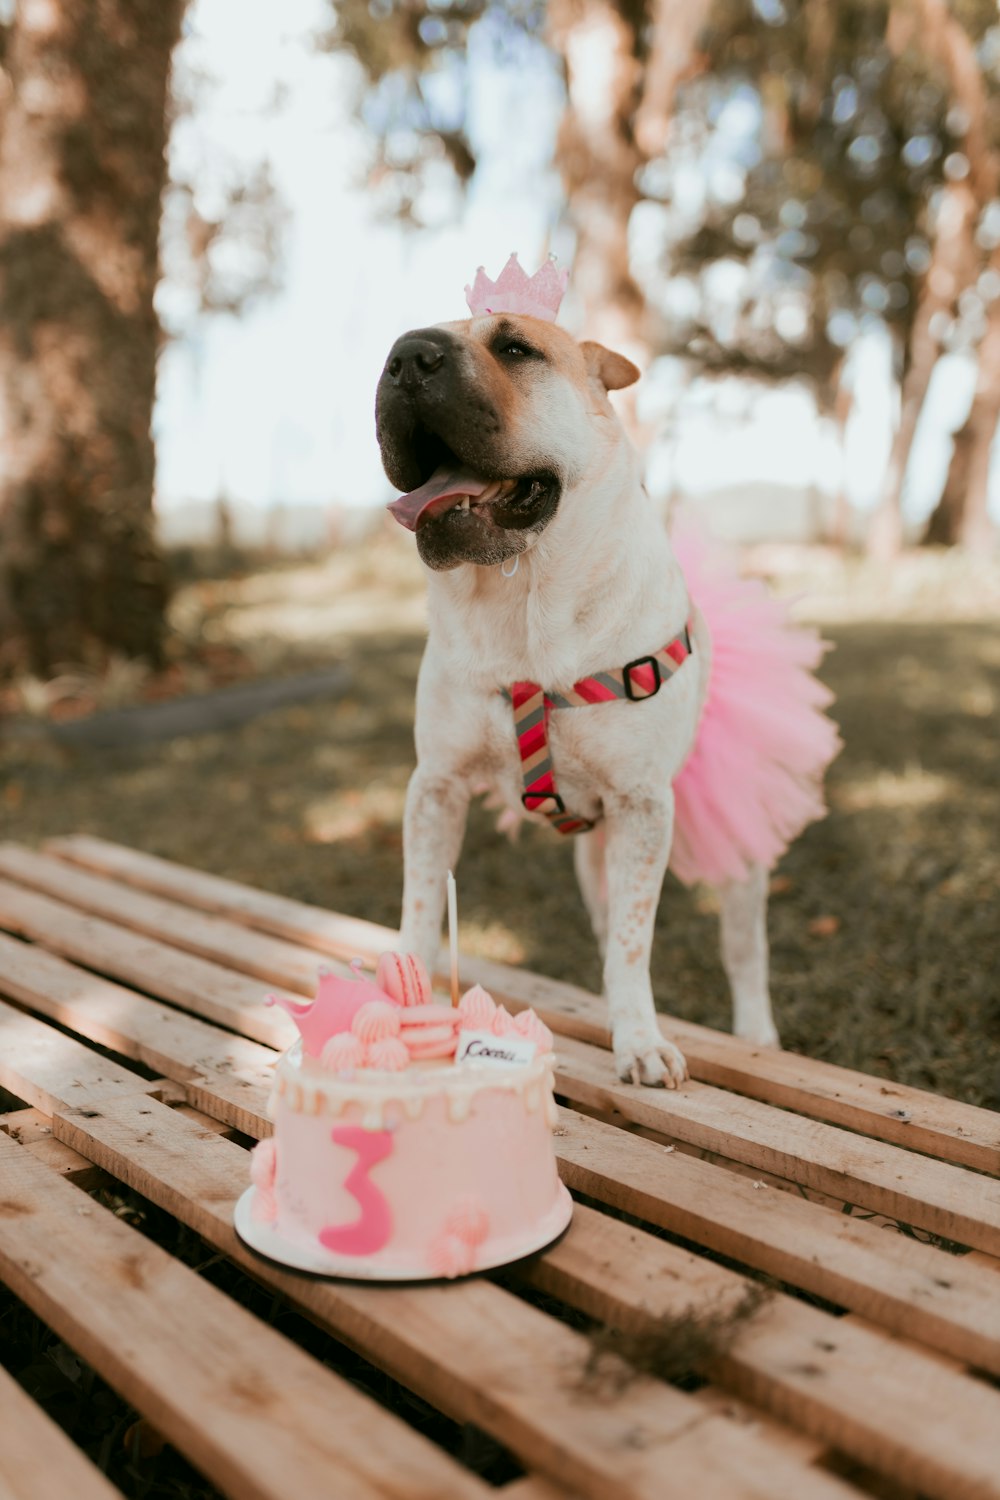 a dog standing next to a cake on a wooden table